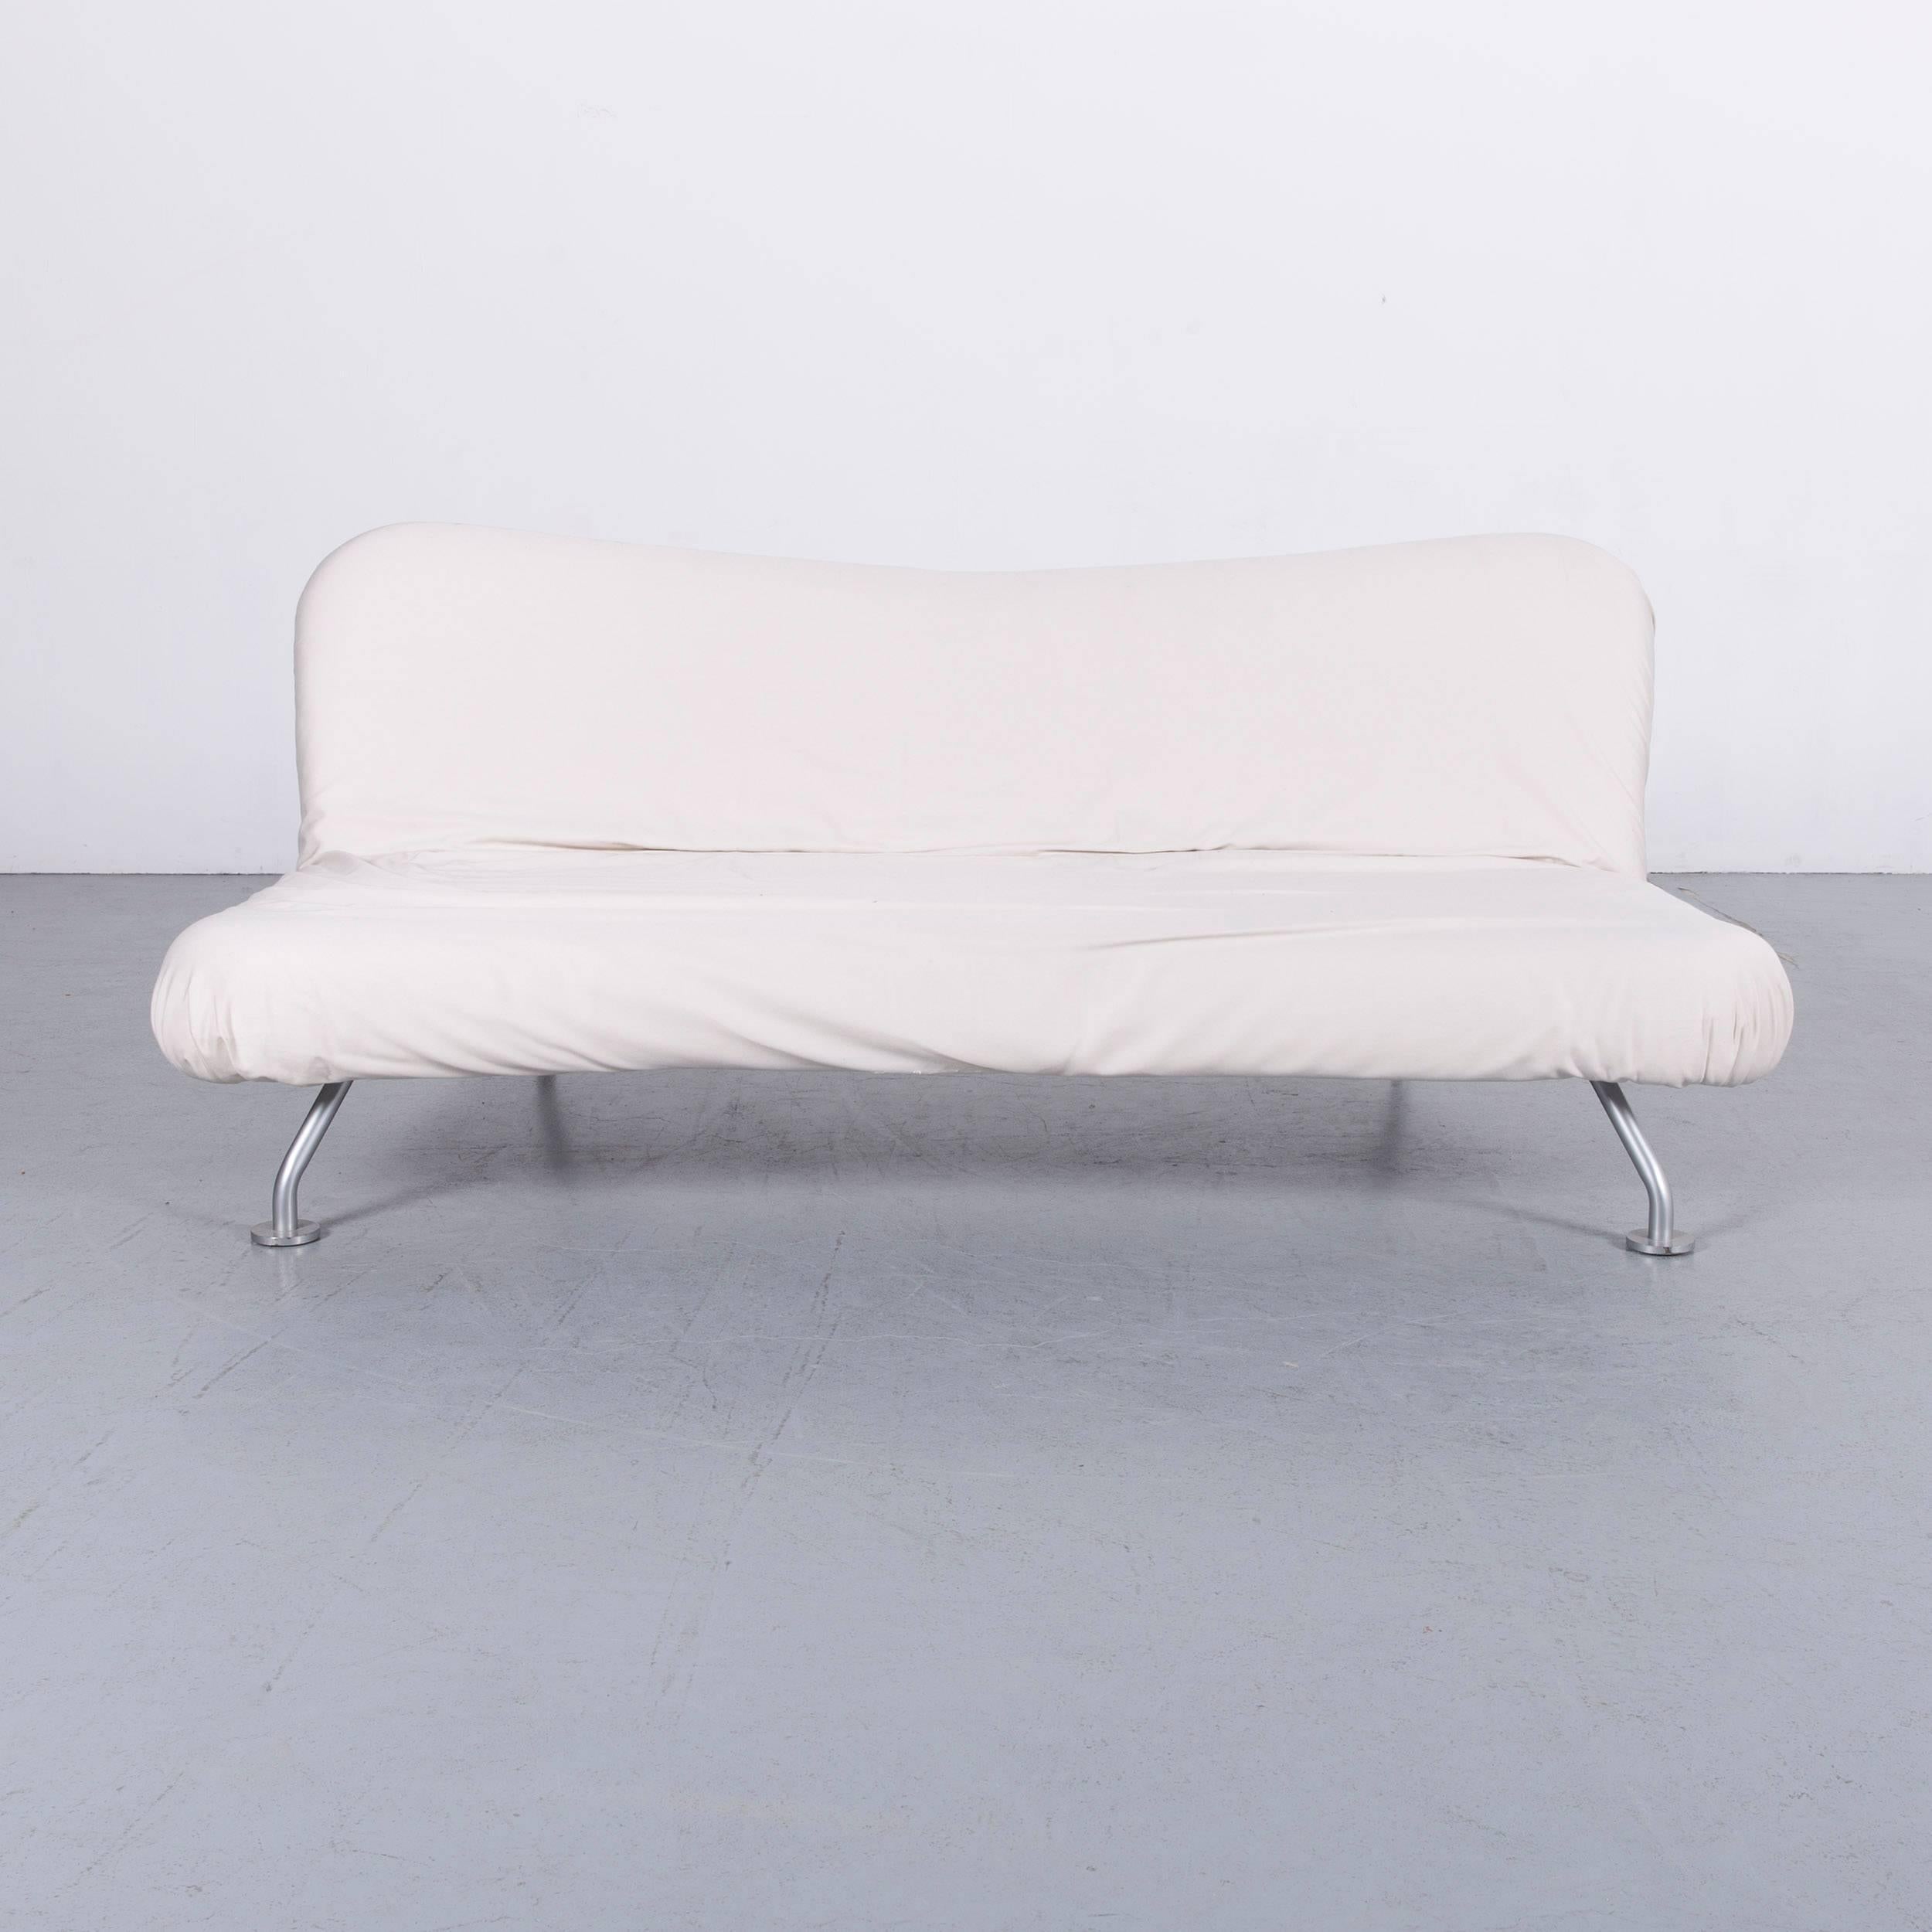 We bring to you an Brühl & Sippold more bed-sofa in white fabric couch.